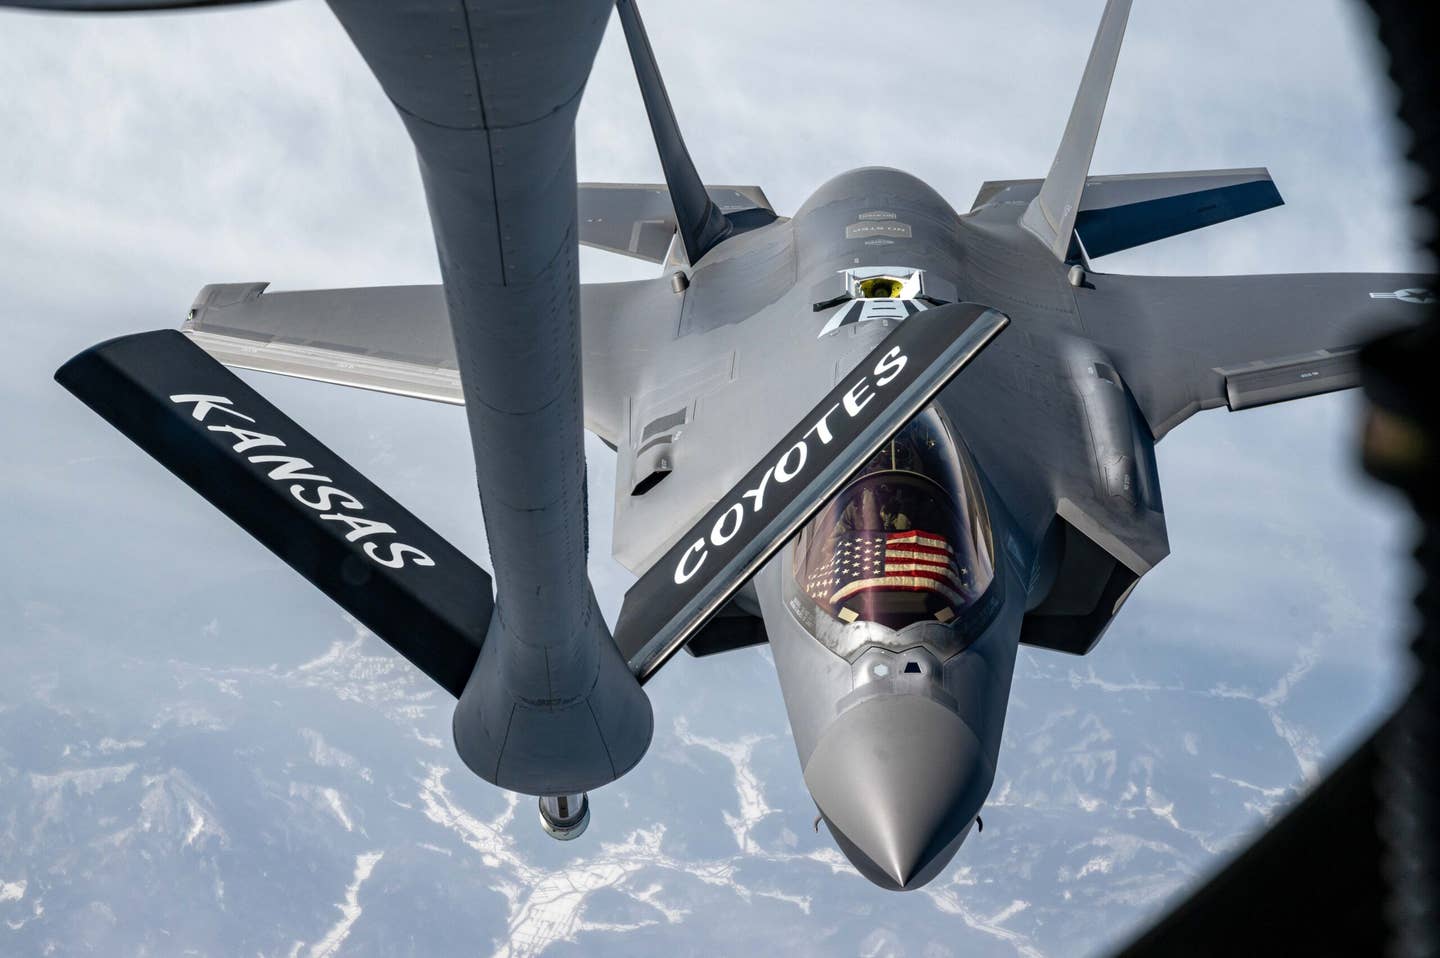 An F-35A from the 354th Fighter Wing, Eielson Air Force Base, Alaska, approaches a KC-135 Stratotanker assigned to the 117th Air Refueling Squadron, Forbes Field Air National Guard Base, Kansas, over the Indo-Pacific, March 10, 2022. The F-35As were deployed to Kadena Air Base for integrated operations with joint partners and allies in the Pacific region. <em>U.S. Air Force photo by Airman 1st Class Yosselin Perla</em>